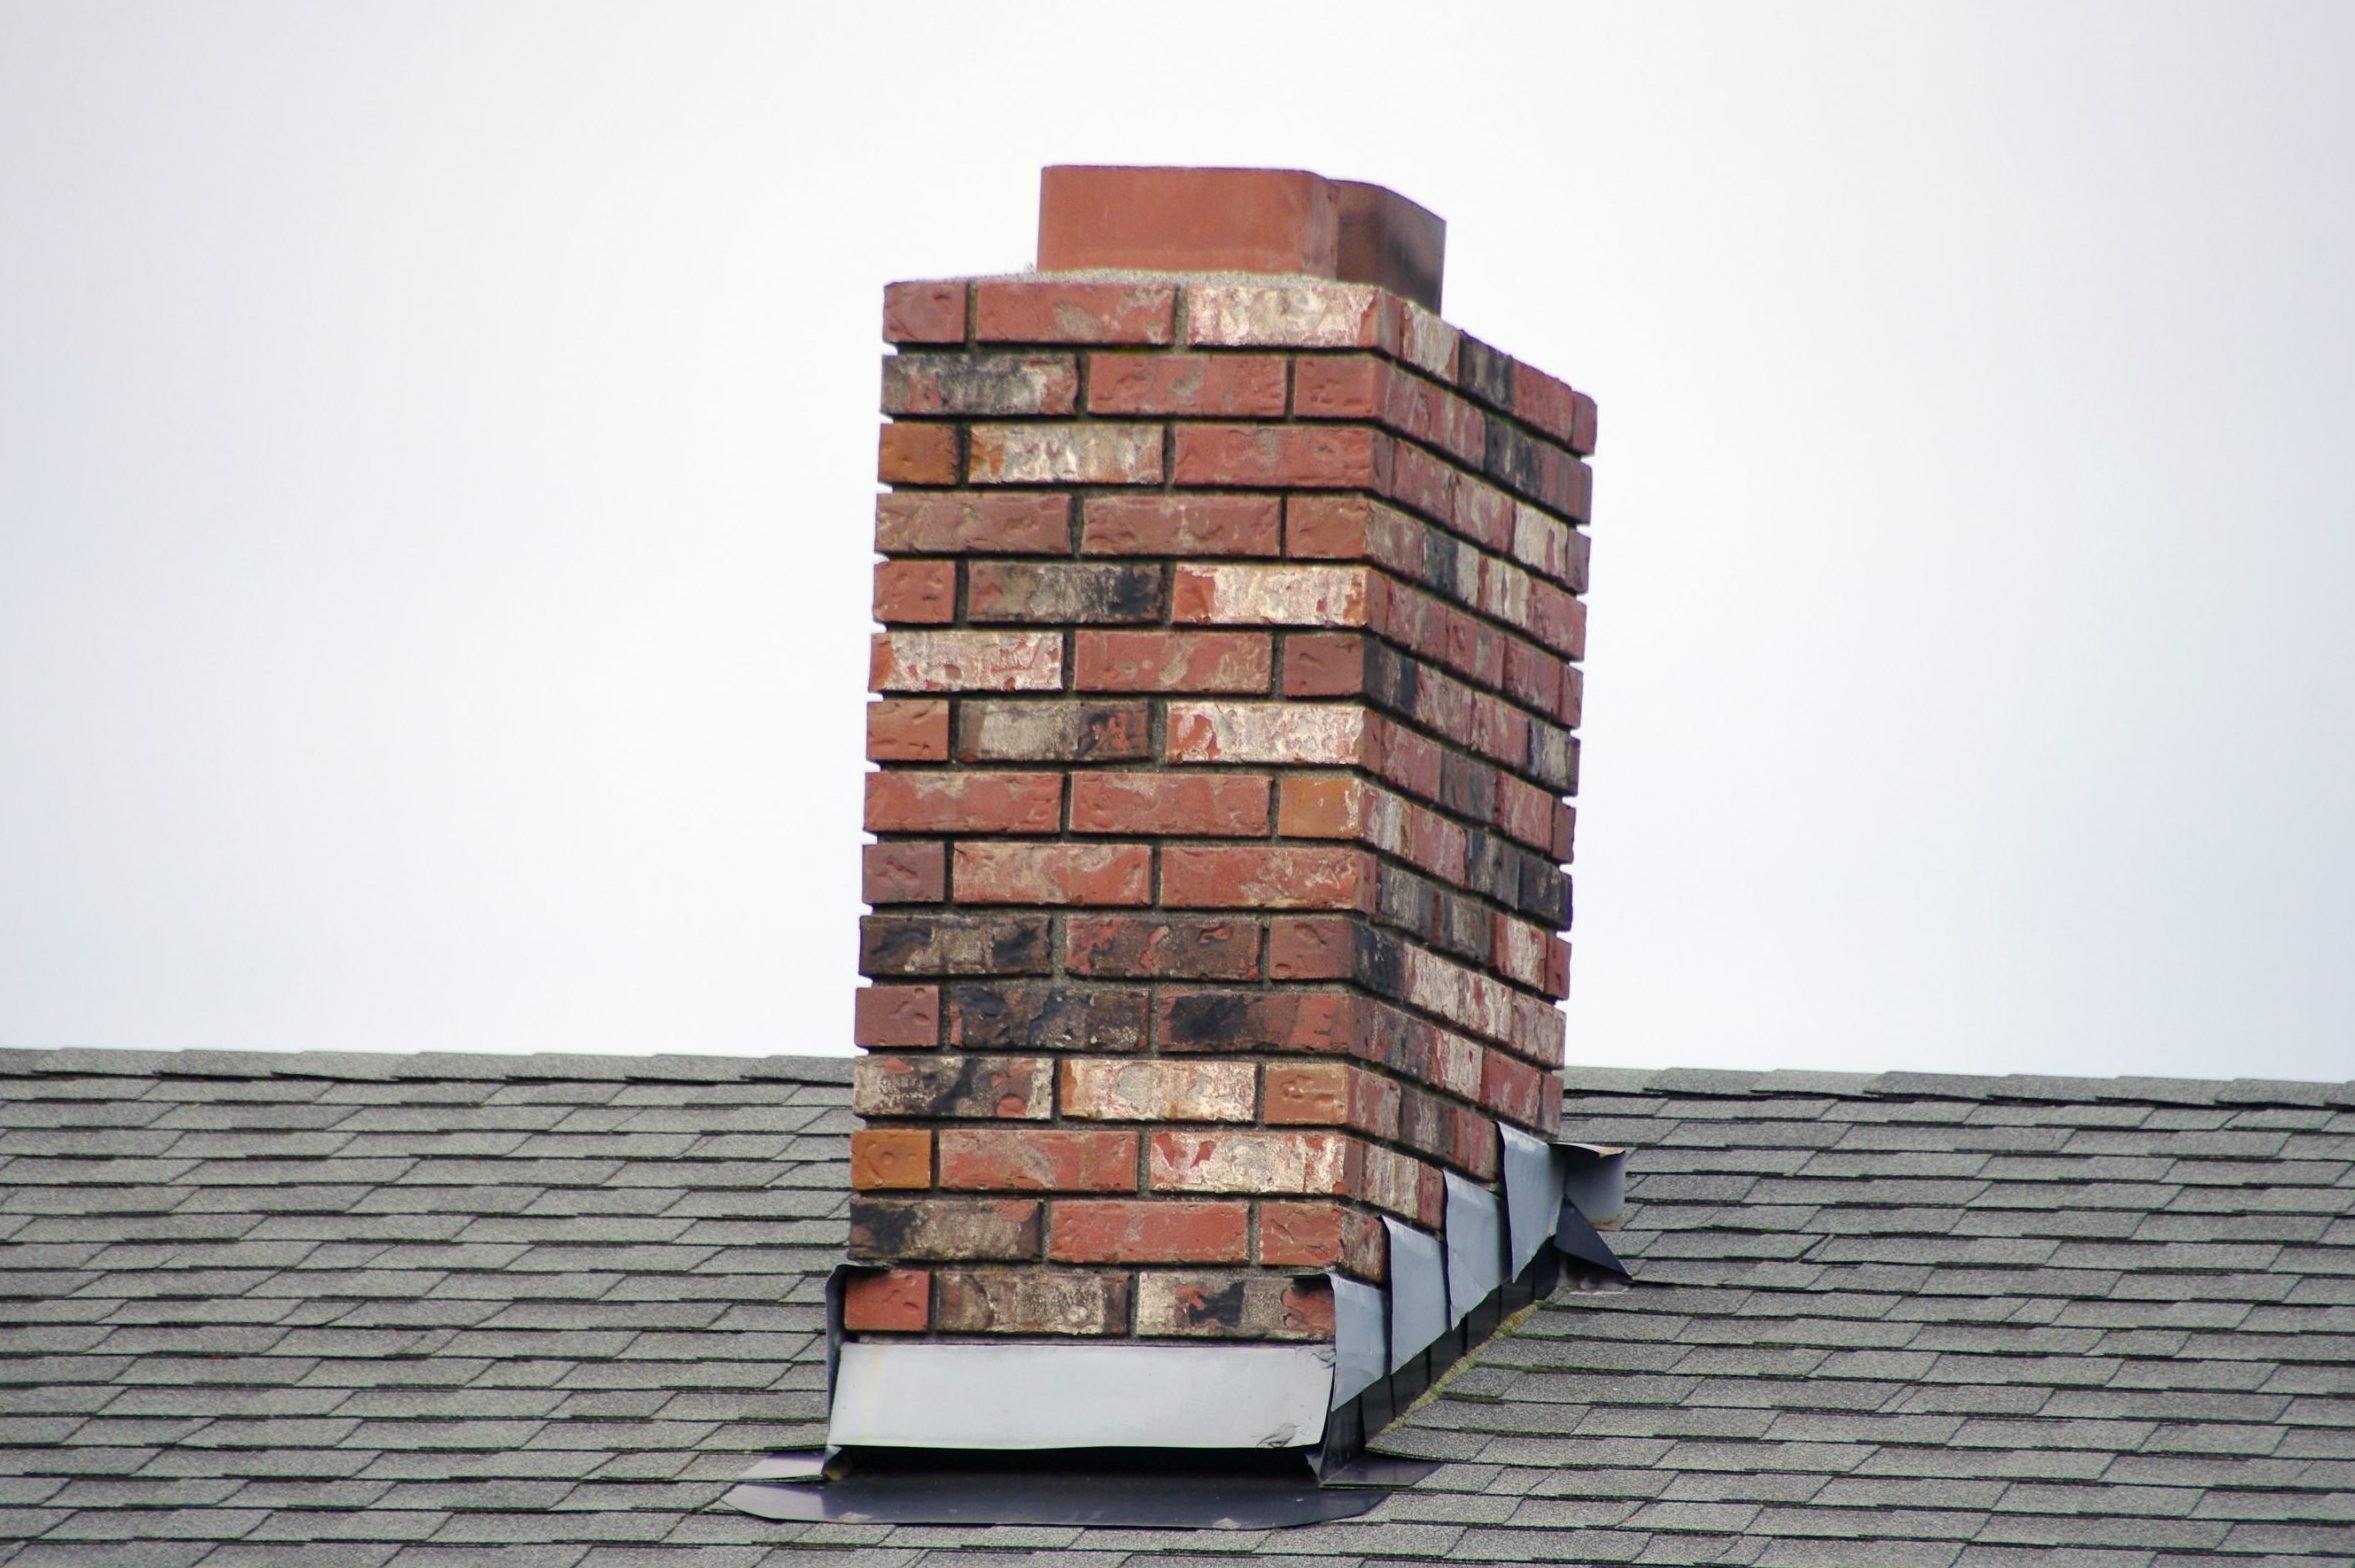 Chimney Cleaning Seattle